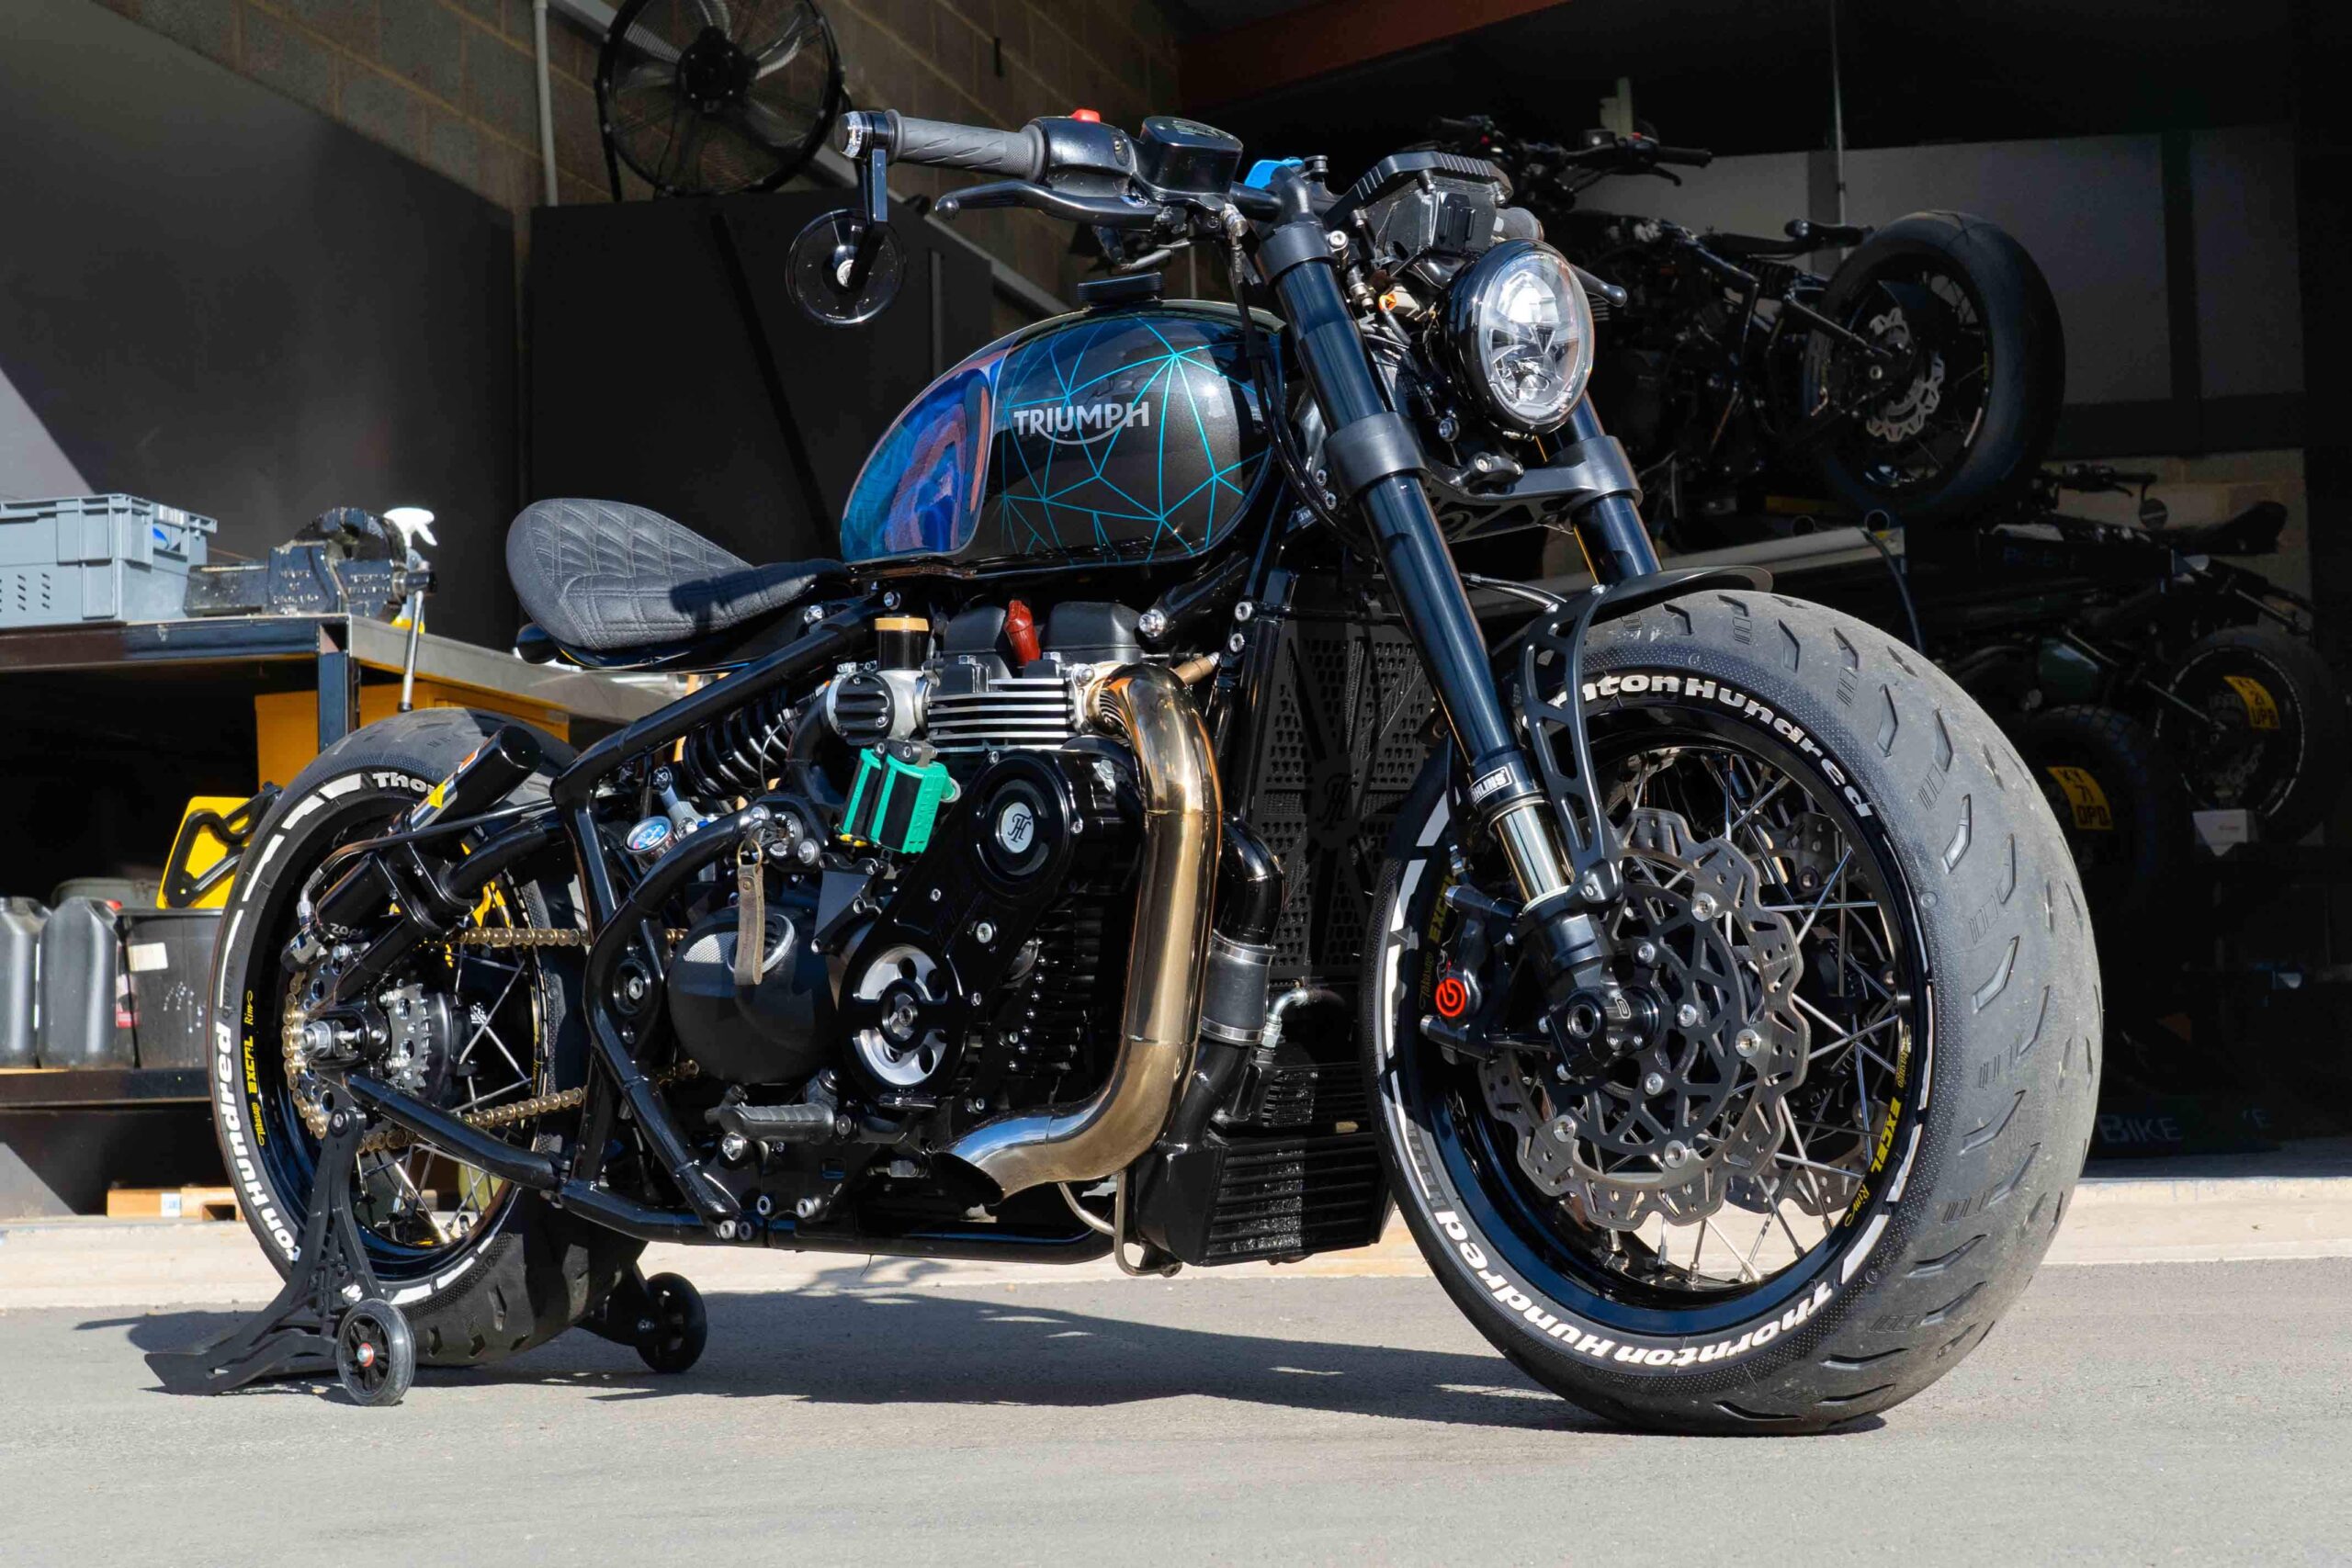 The World's Fastest Bobber: A Triumph Bobber With A Supercharger +